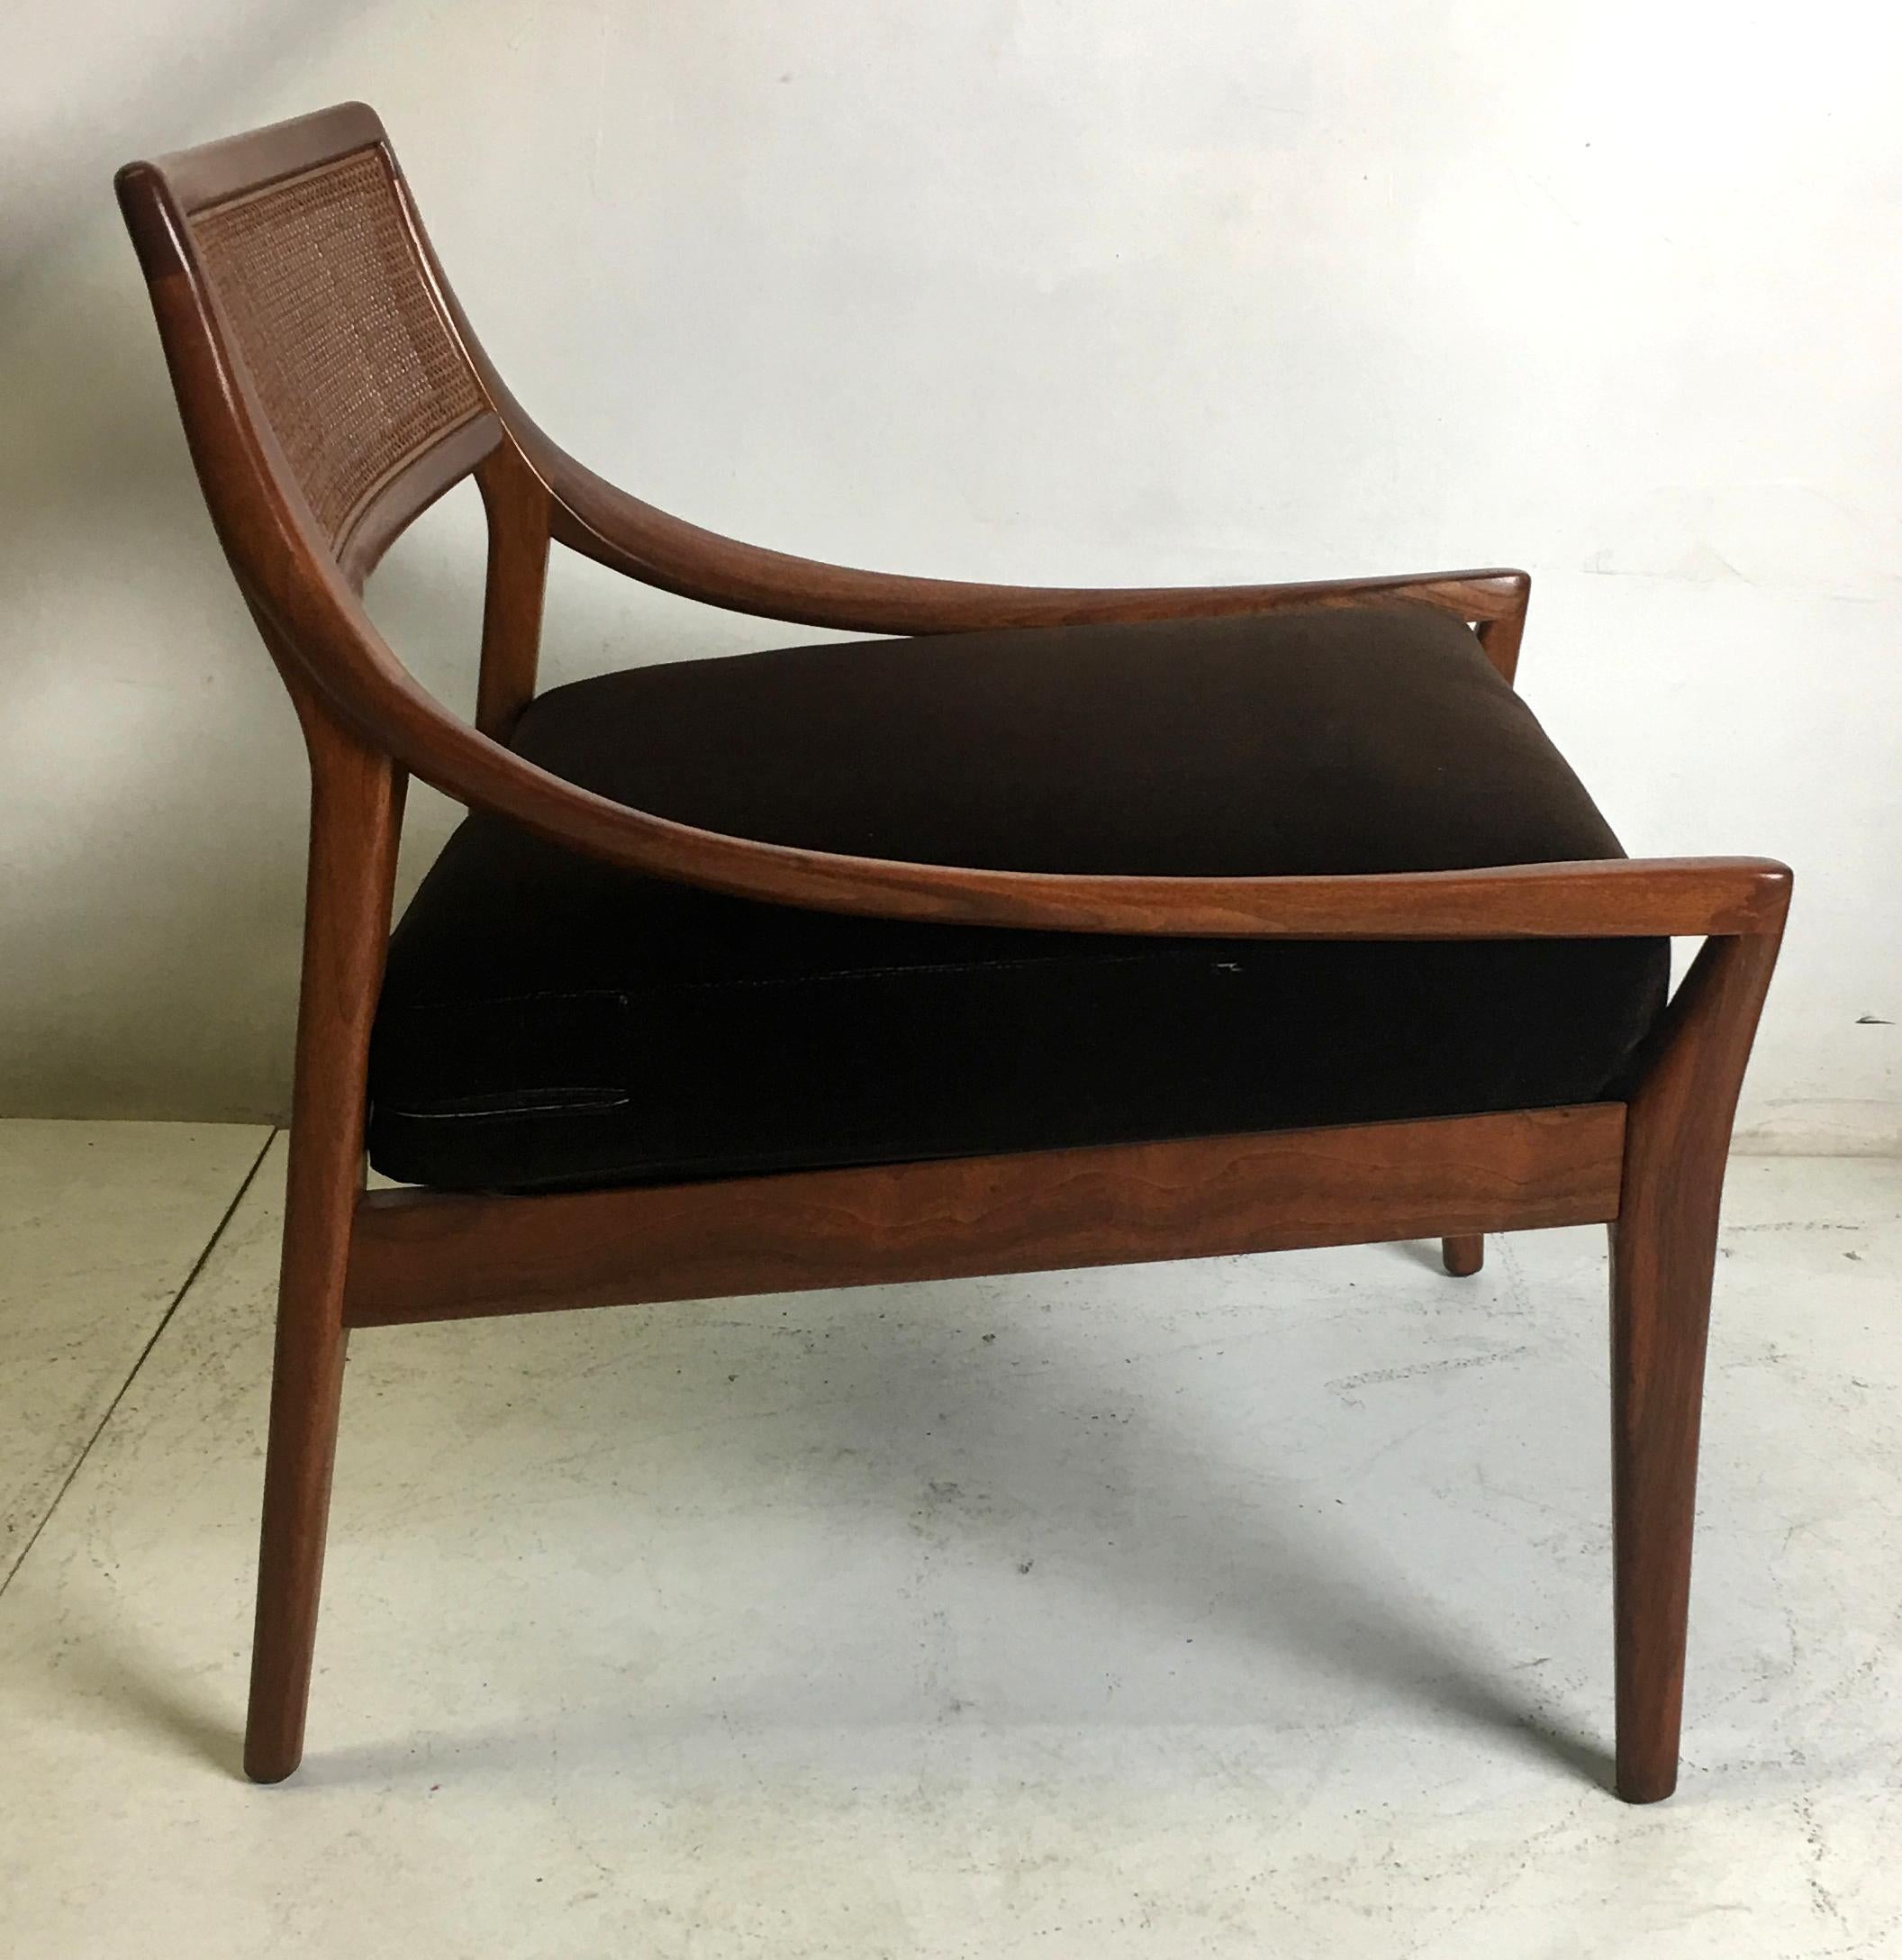 American Pair of Walnut Armchairs by Kipp Stewart for Directional